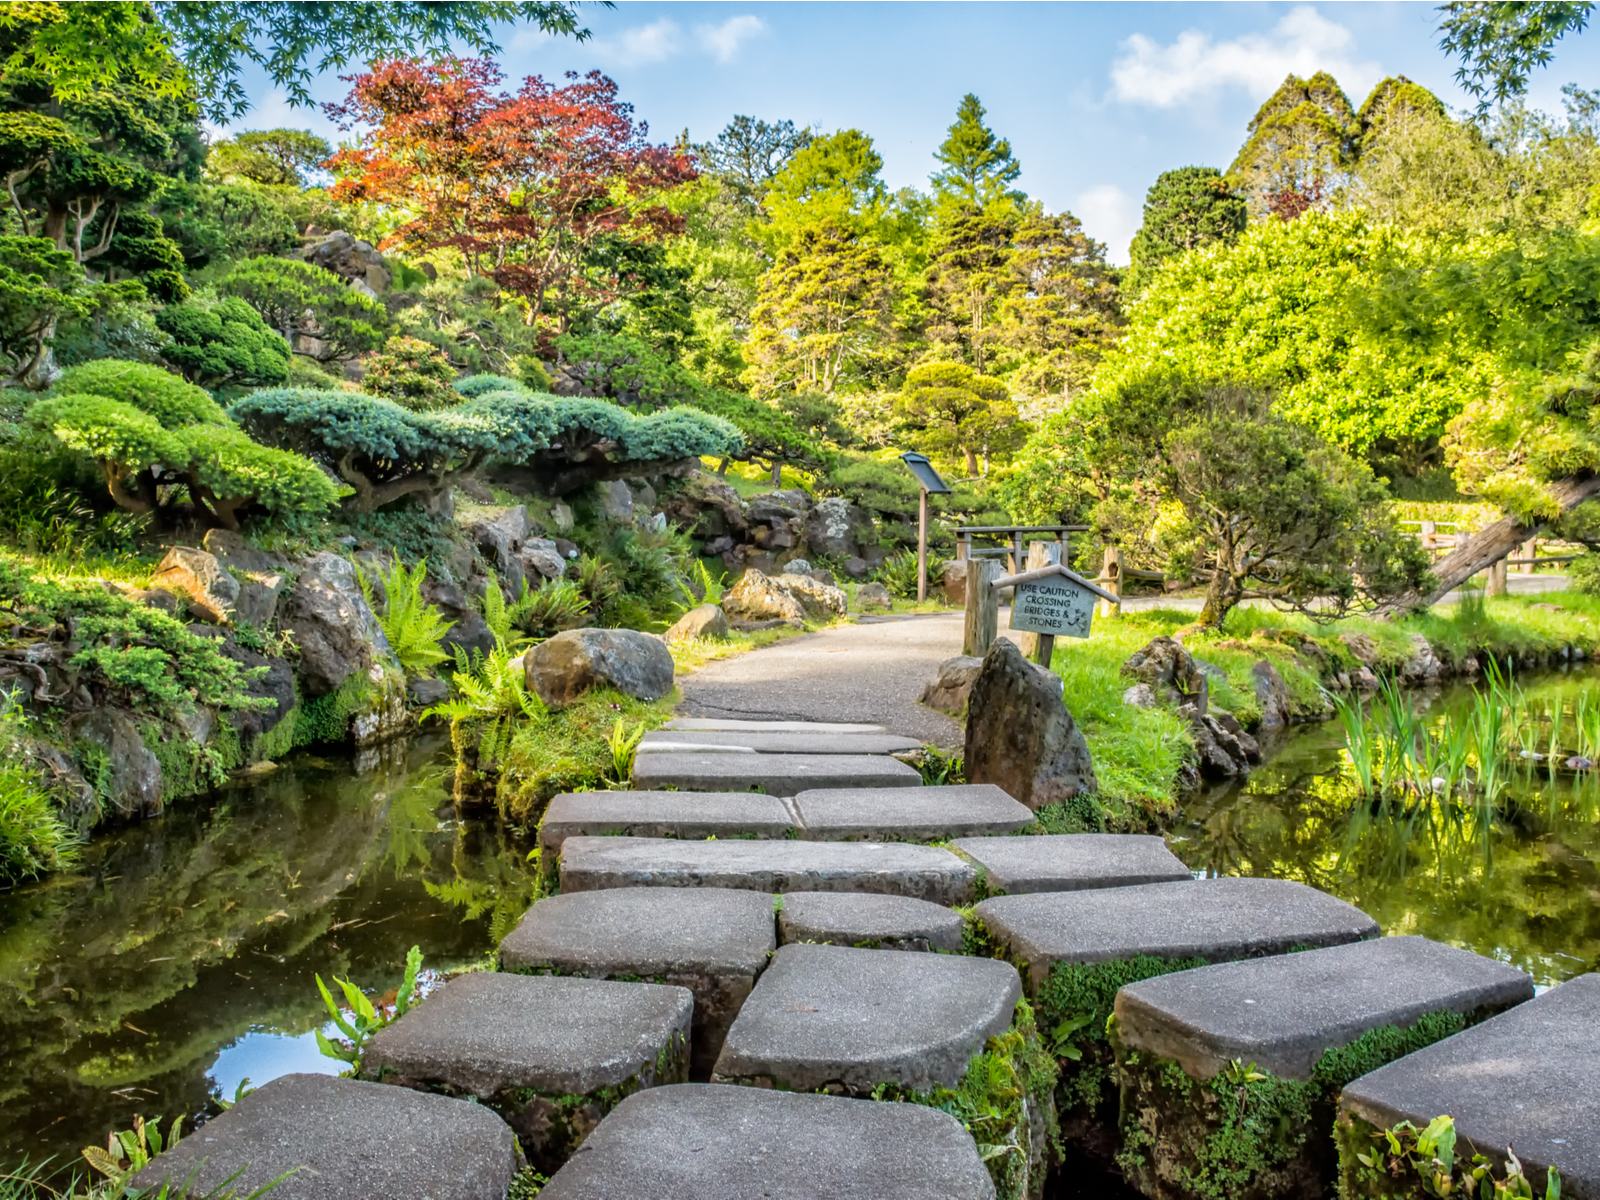 Fern and Moss-infested slabs of stone are used as a footpath to cross a pond in the Japanese Garden at Golden Gate Park, a piece on the best things to do in California